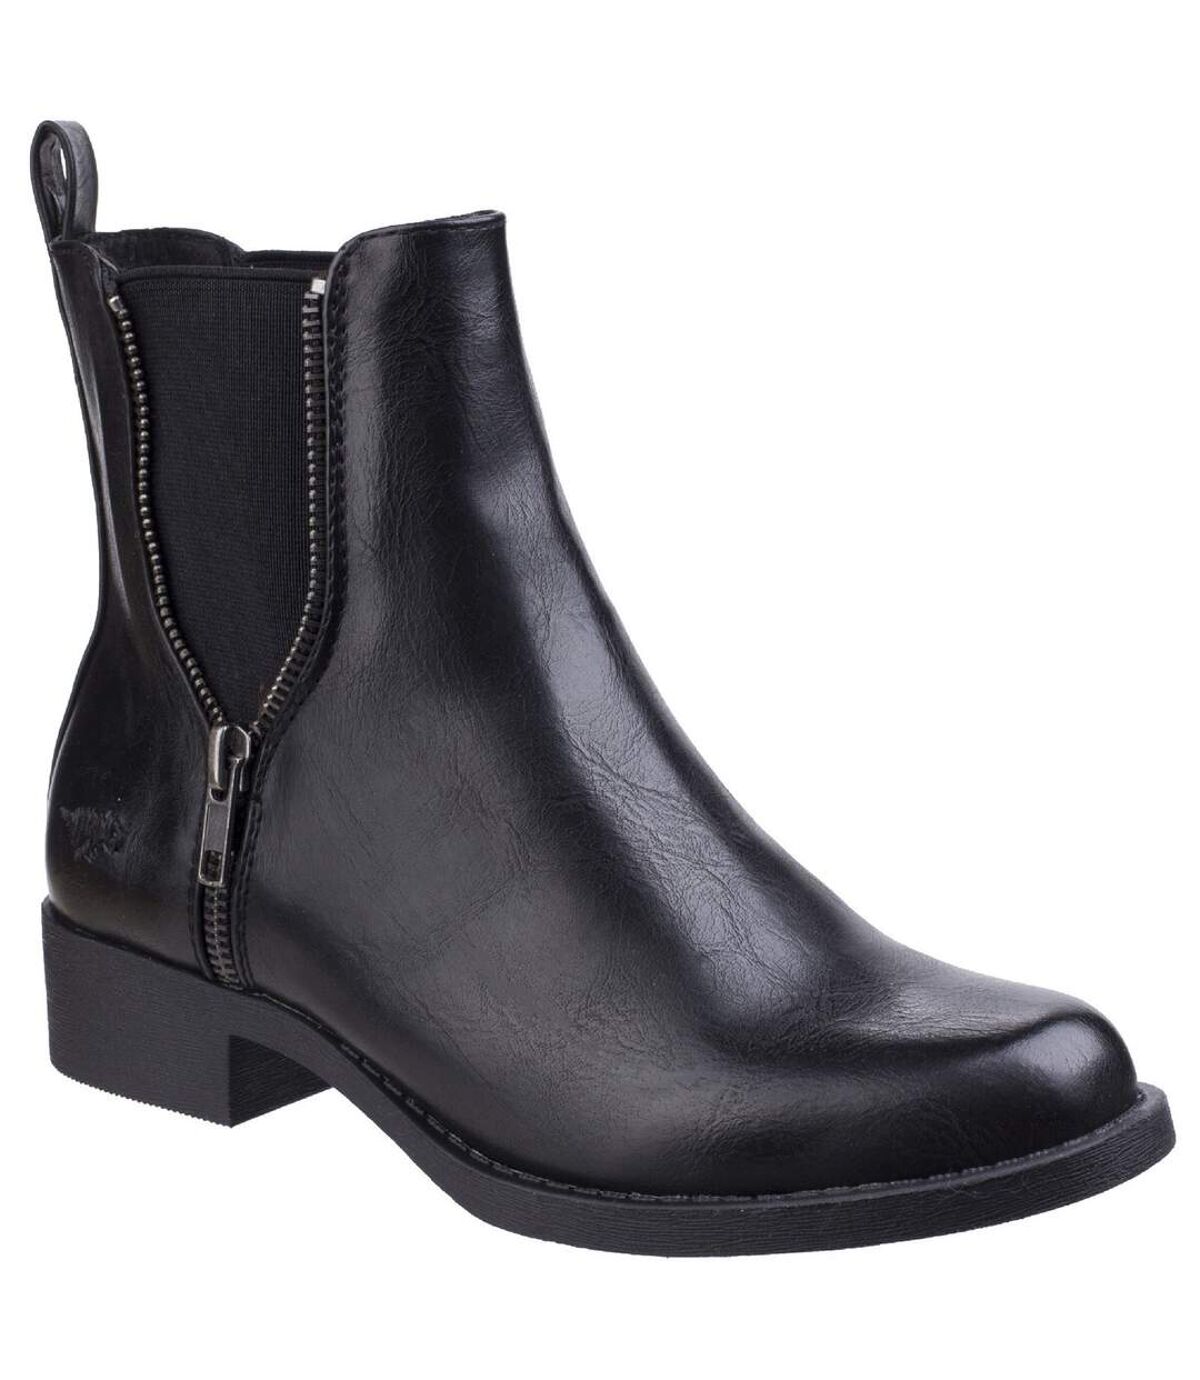 Rocket Dog Womens/Ladies Camilla Bromley Gusset Ankle Boots (Black) - UTFS5321